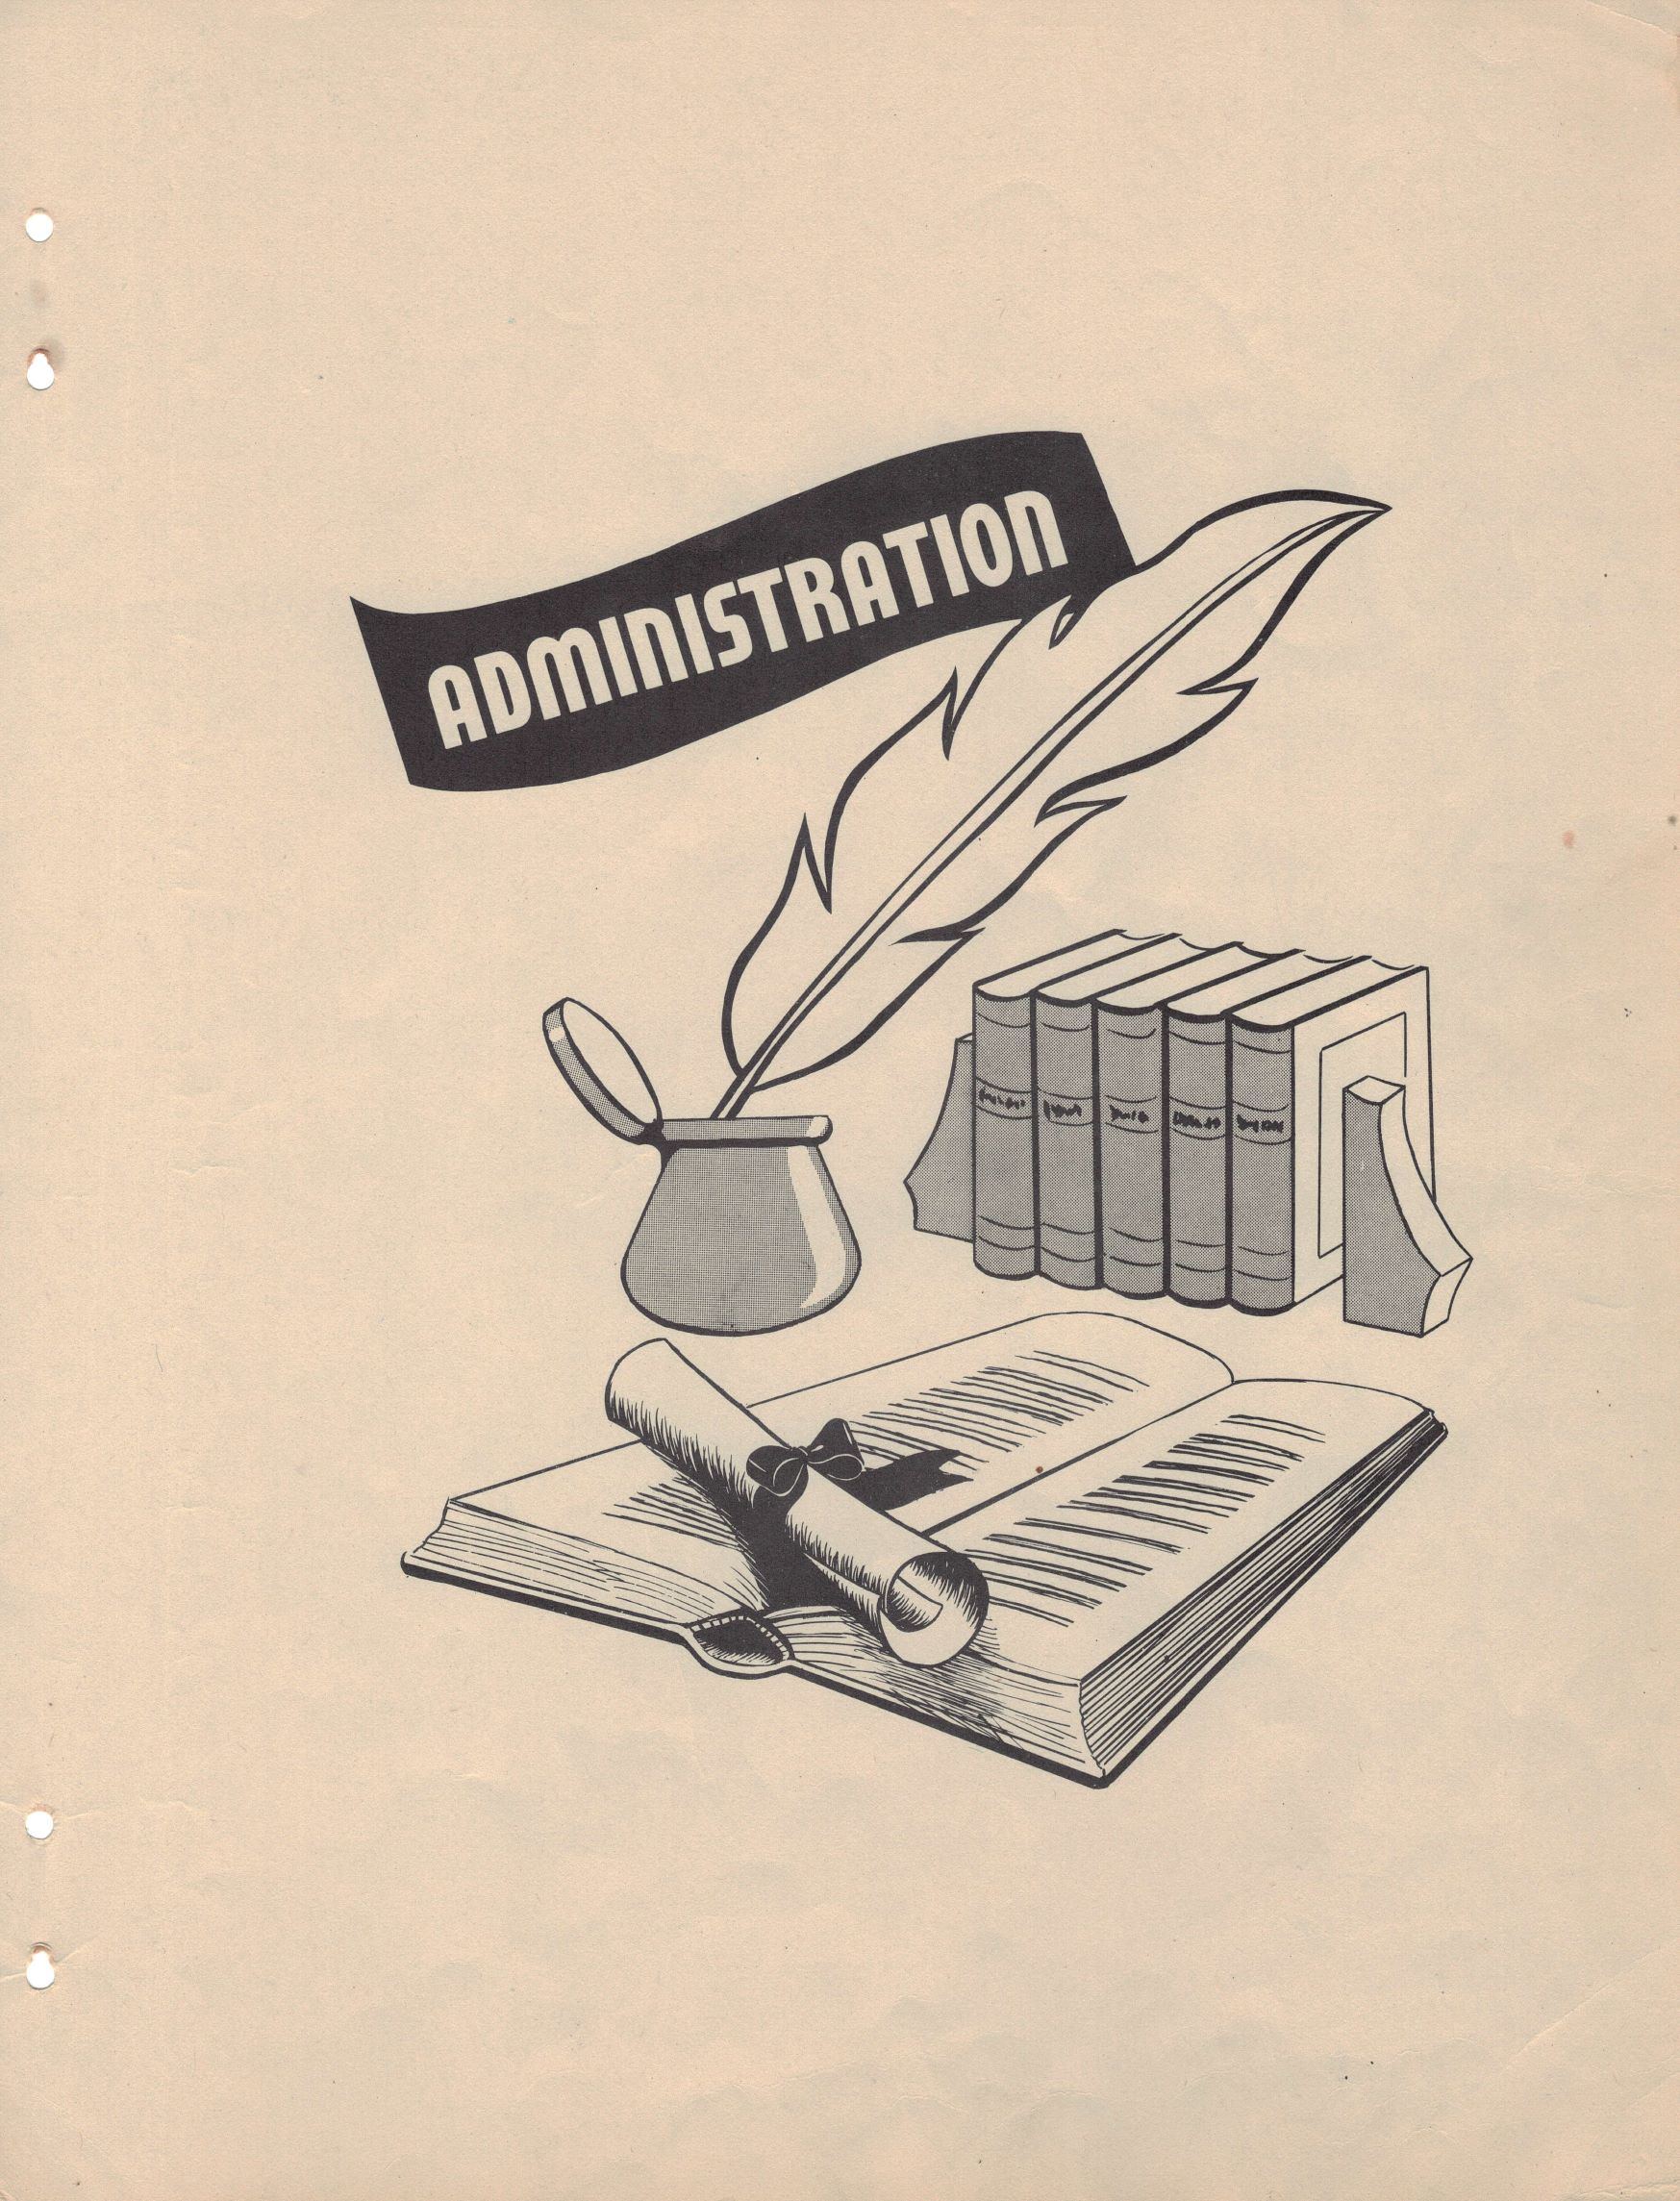 Graphic of open book with a scroll on top in front of set of books and ink pot with quill under the word "Administration"